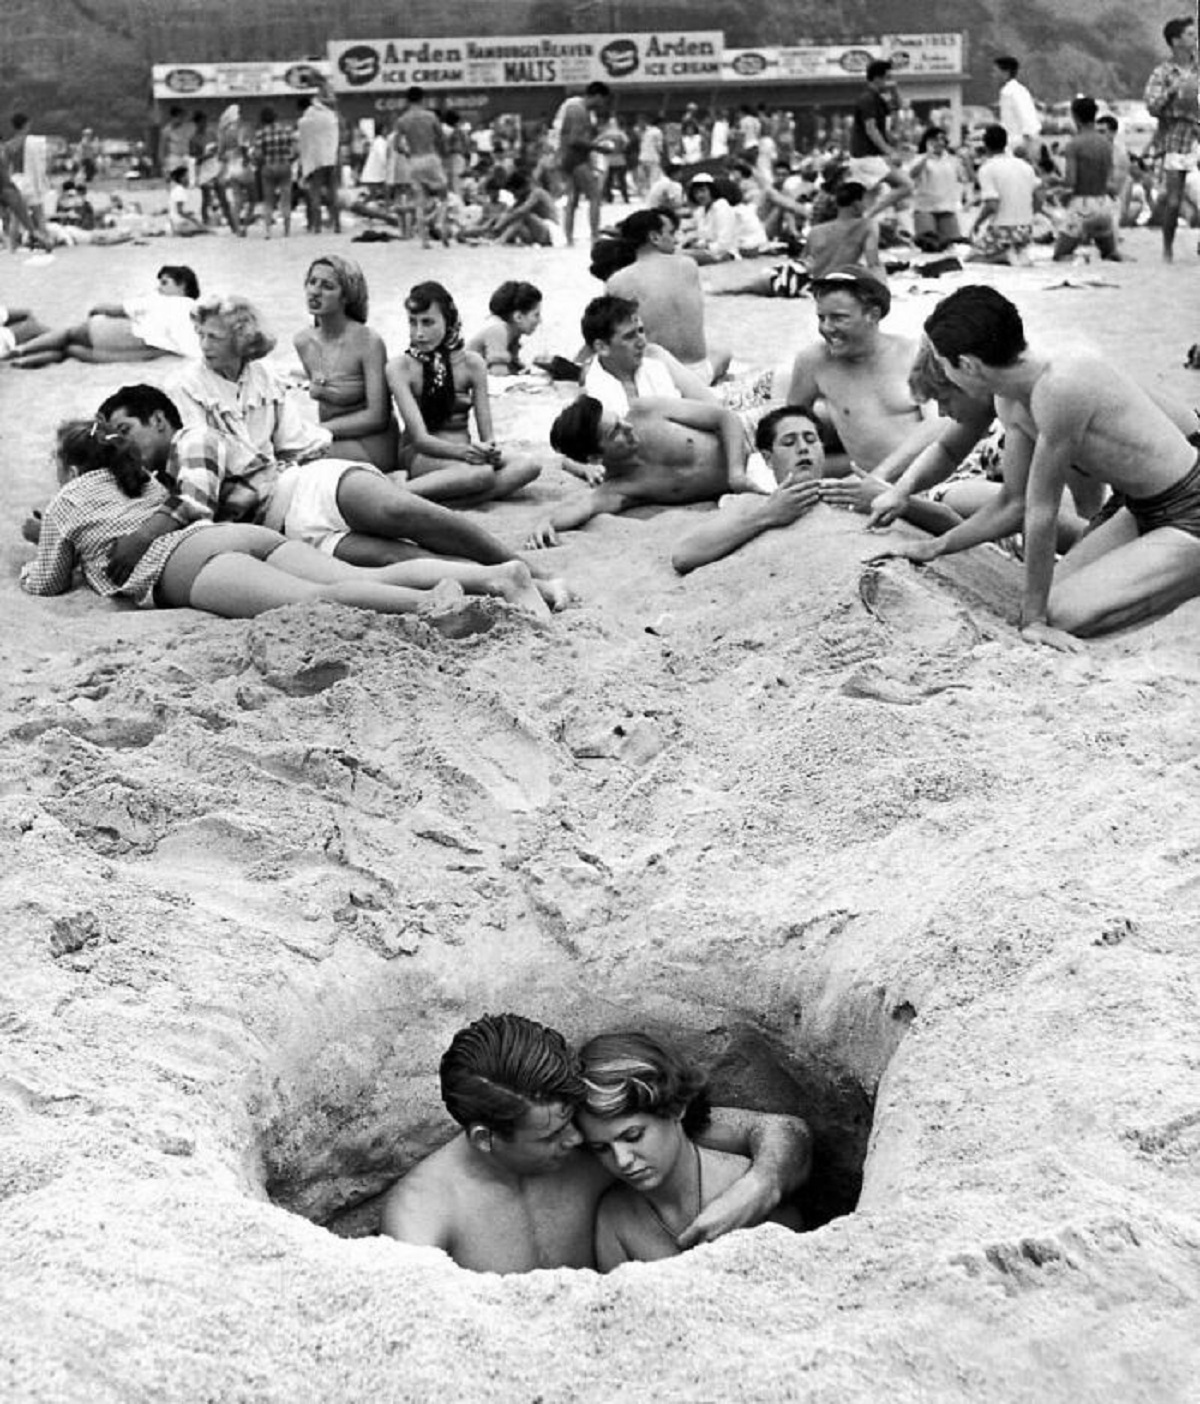 Couple Cuddling While Sitting In A Hole As Others Enjoy The Beach On The 4th Of July In Santa Monica, California, 1950. (Photographed By Ralph Crane)